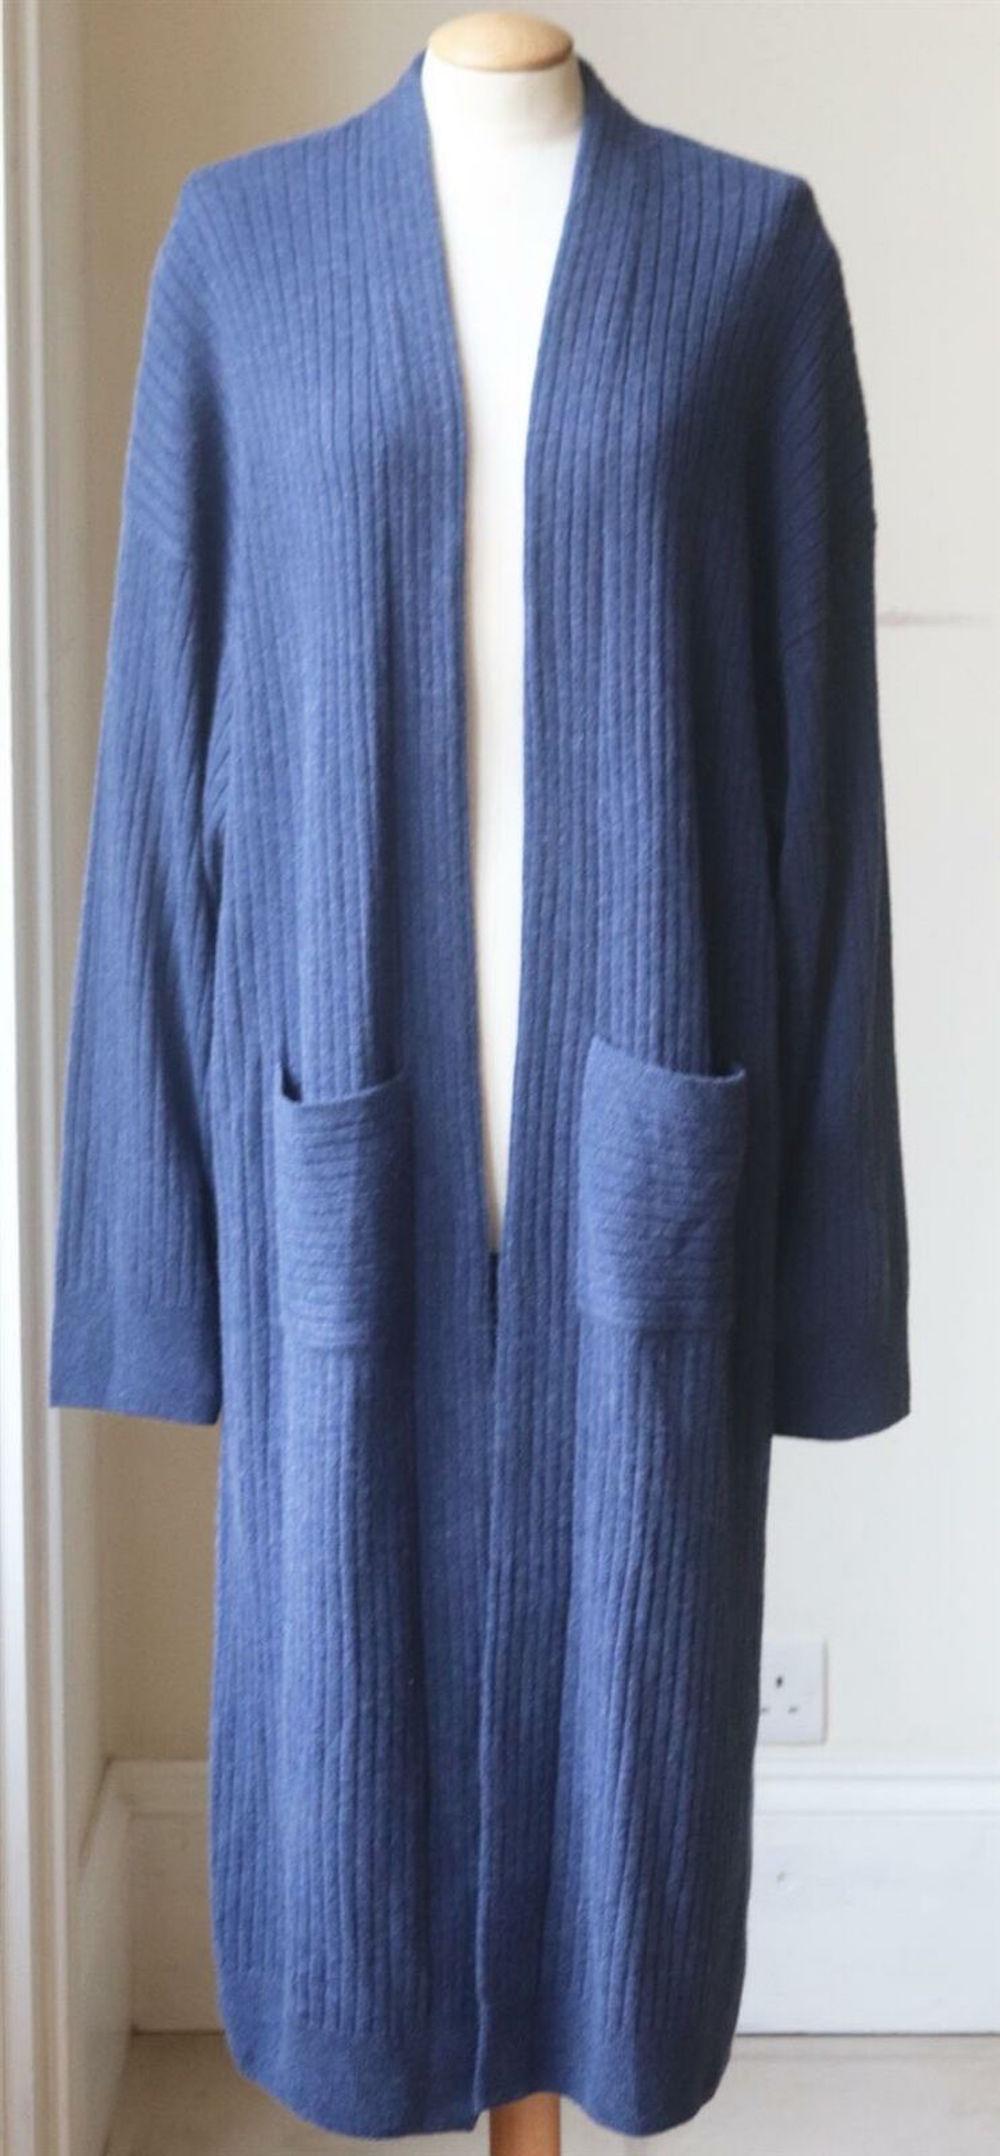 You'll get plenty of wear from this beautiful 'Cade' Sablyn cardigan, long after you days on the ski slopes, it's knitted from soft ribbed cashmere and a long streamline silhouette.
Blue cashmere.
Slips on.
100% Cashmere.

Size: Medium (UK 10, US 6,